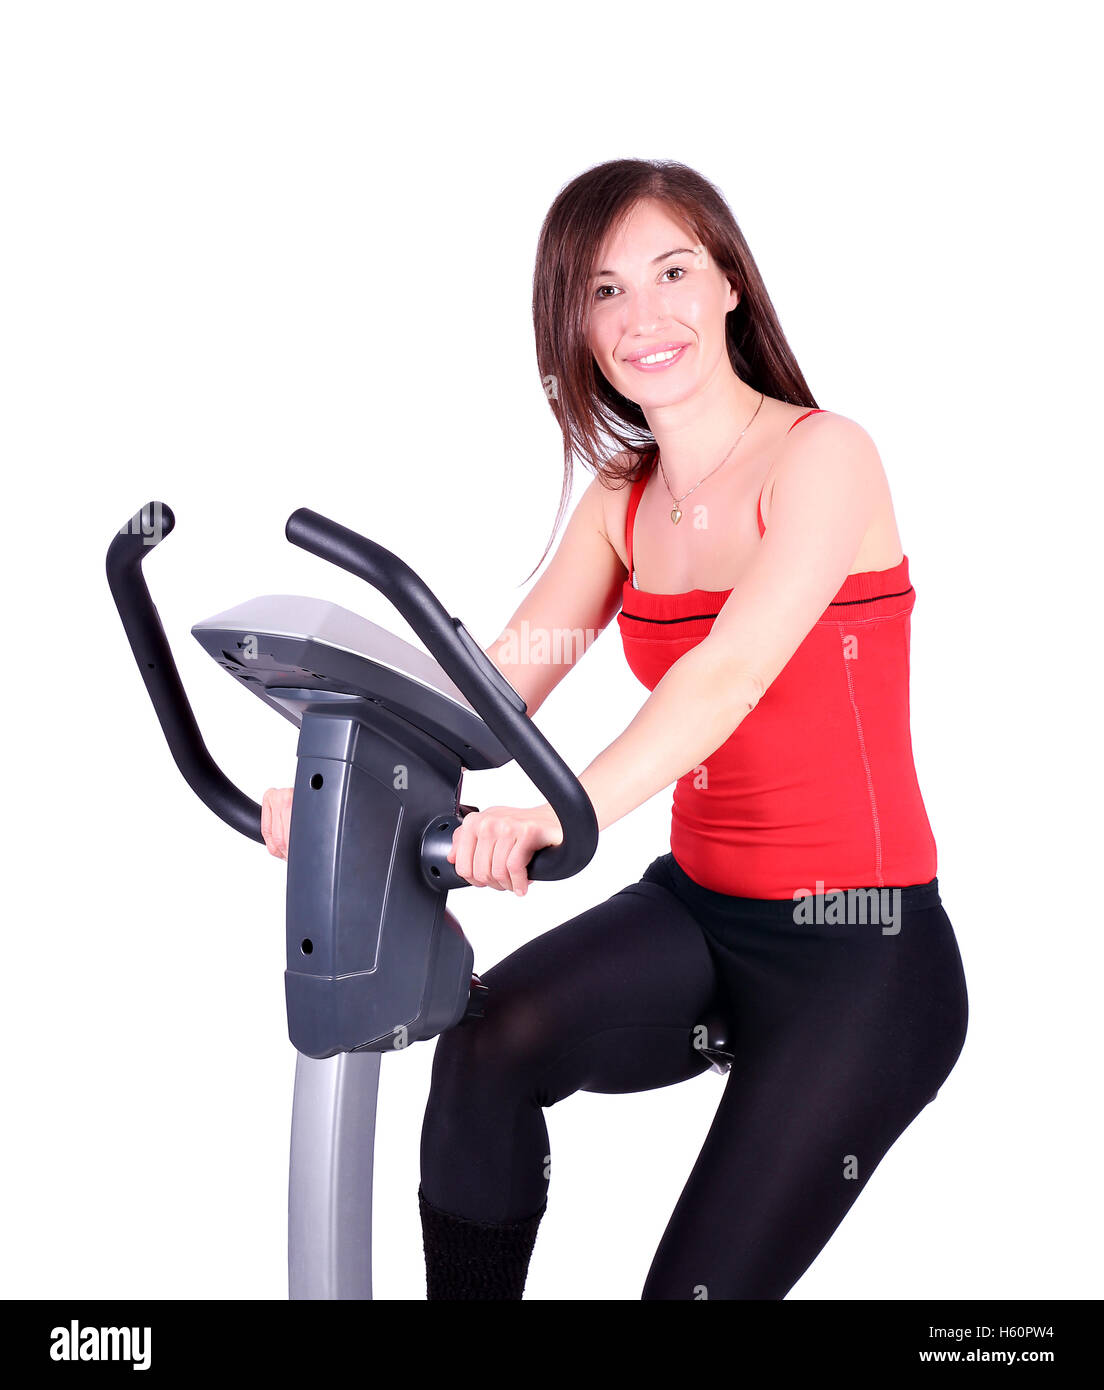 girl exercise with fitness cross trainer Stock Photo